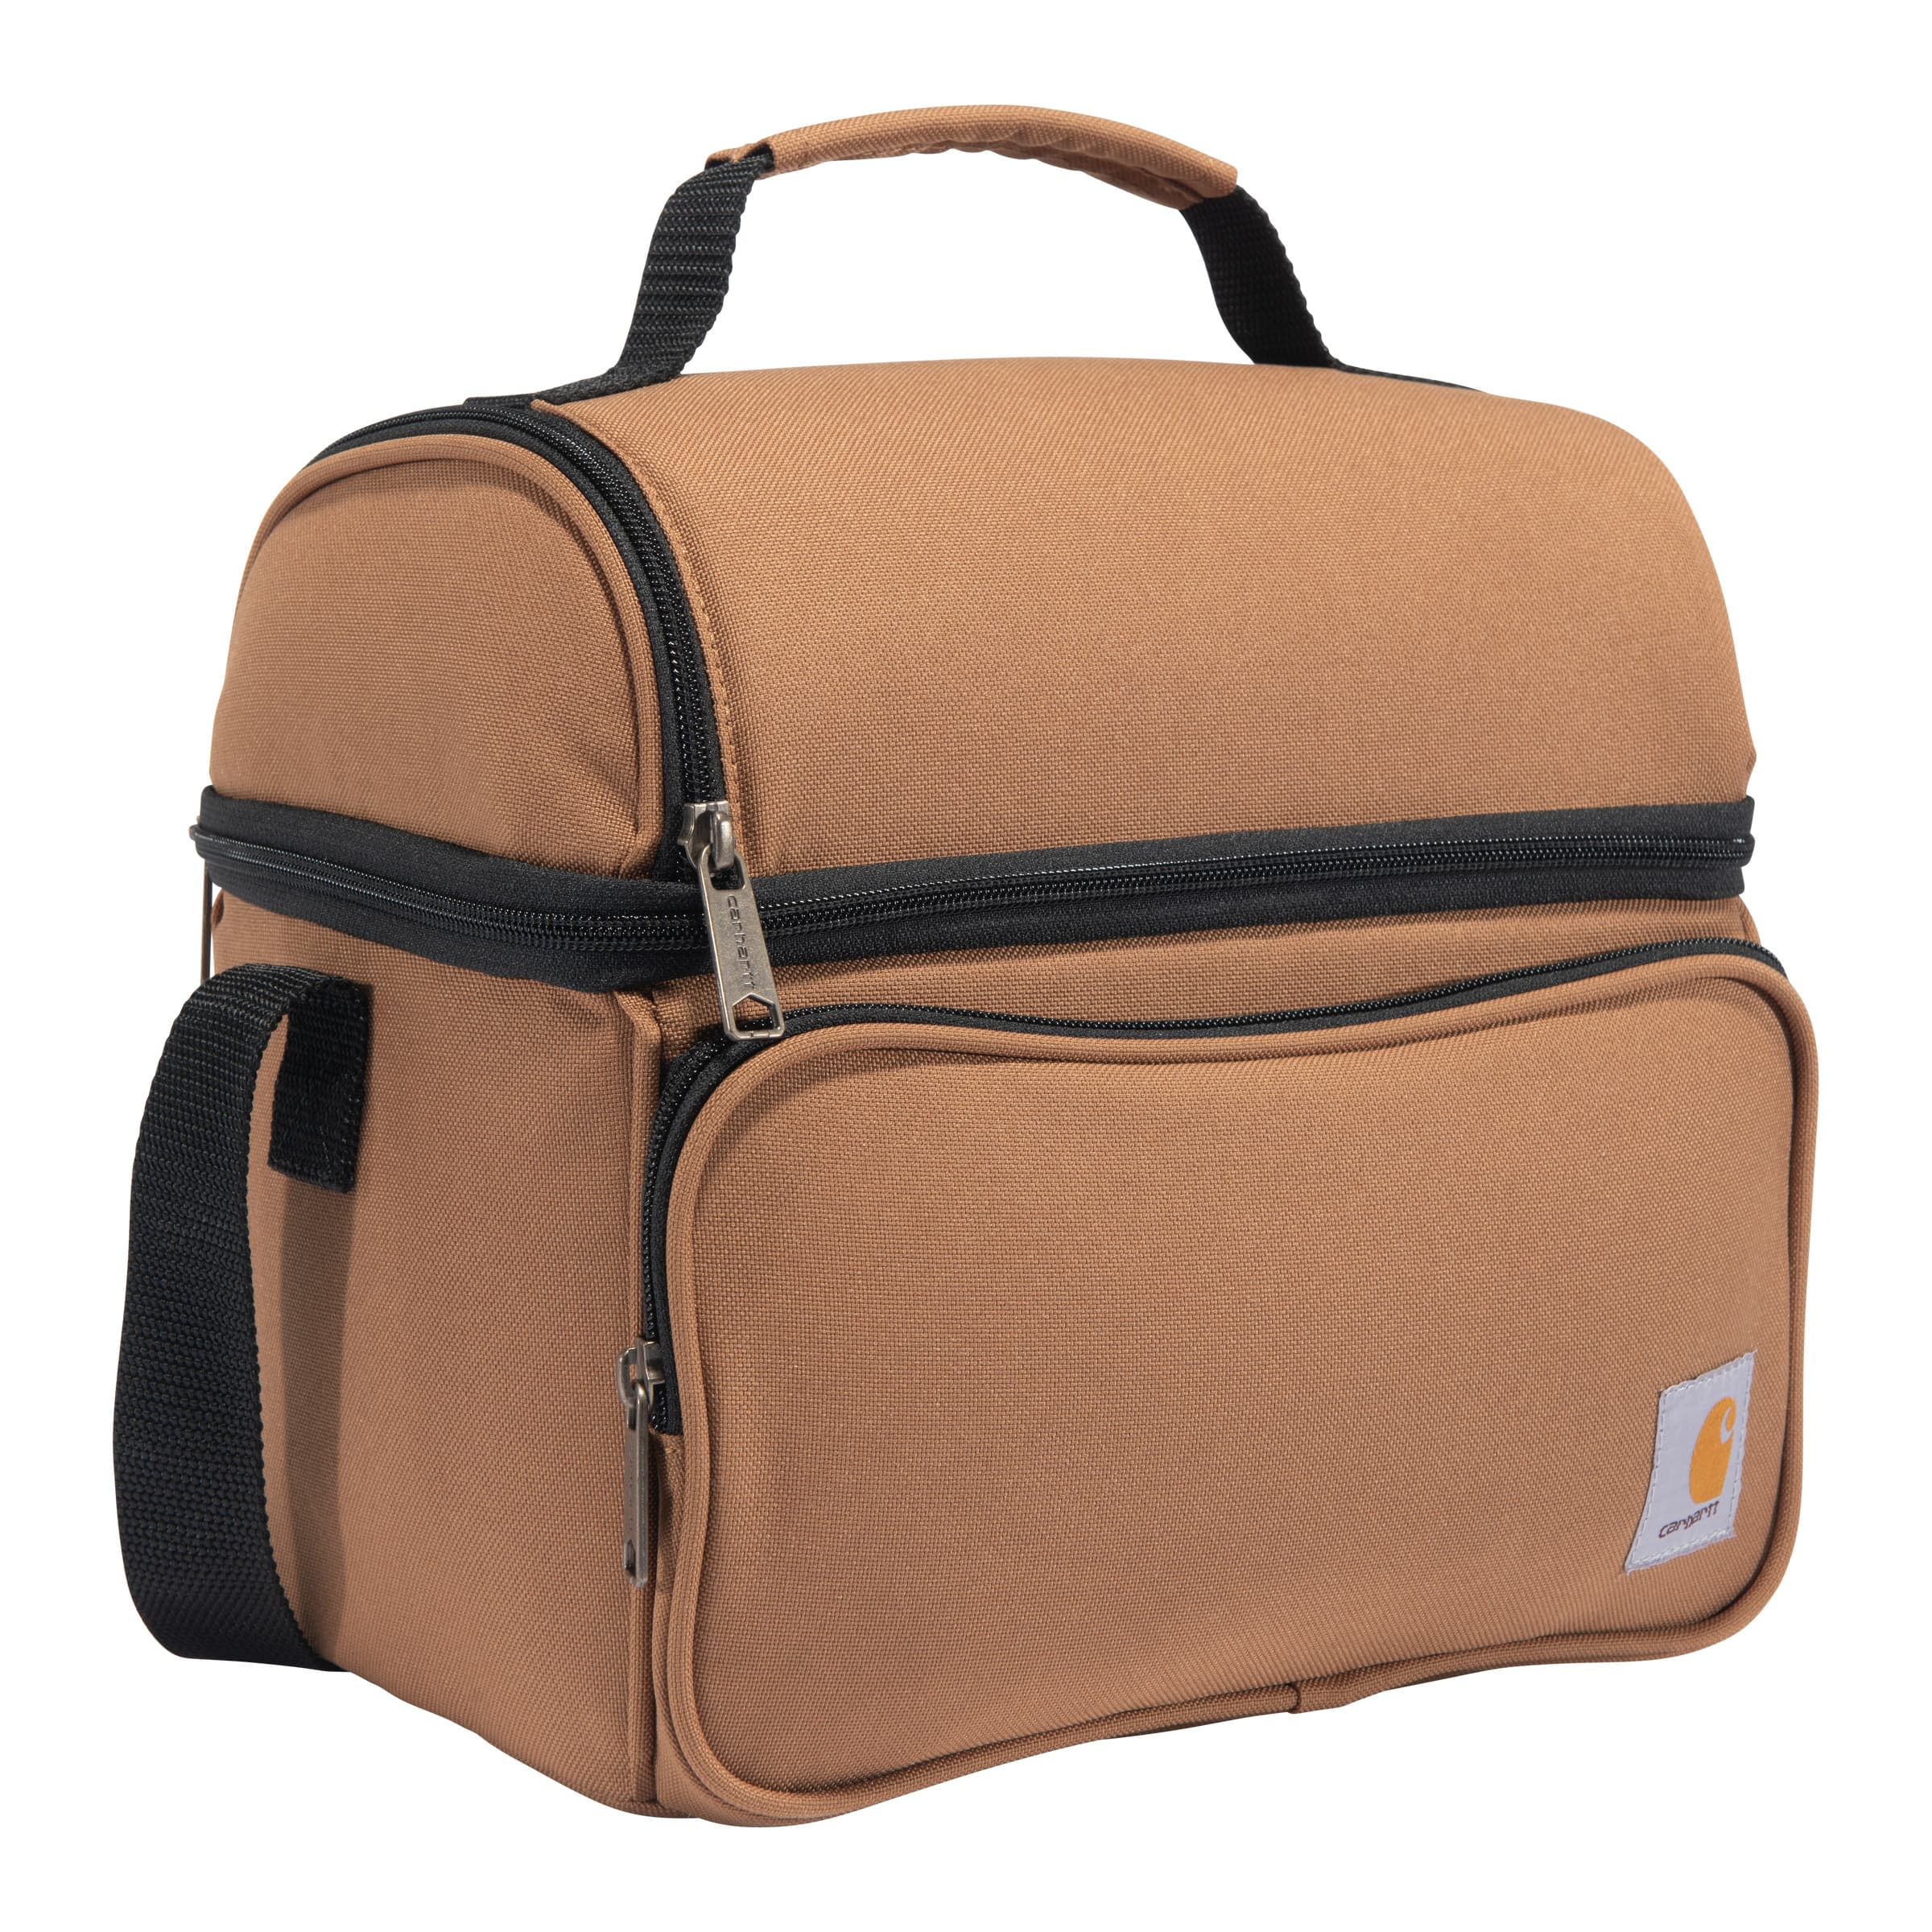 Carhartt® Insulated 12-Can 2-Compartment Lunch Cooler - Carhartt Brown